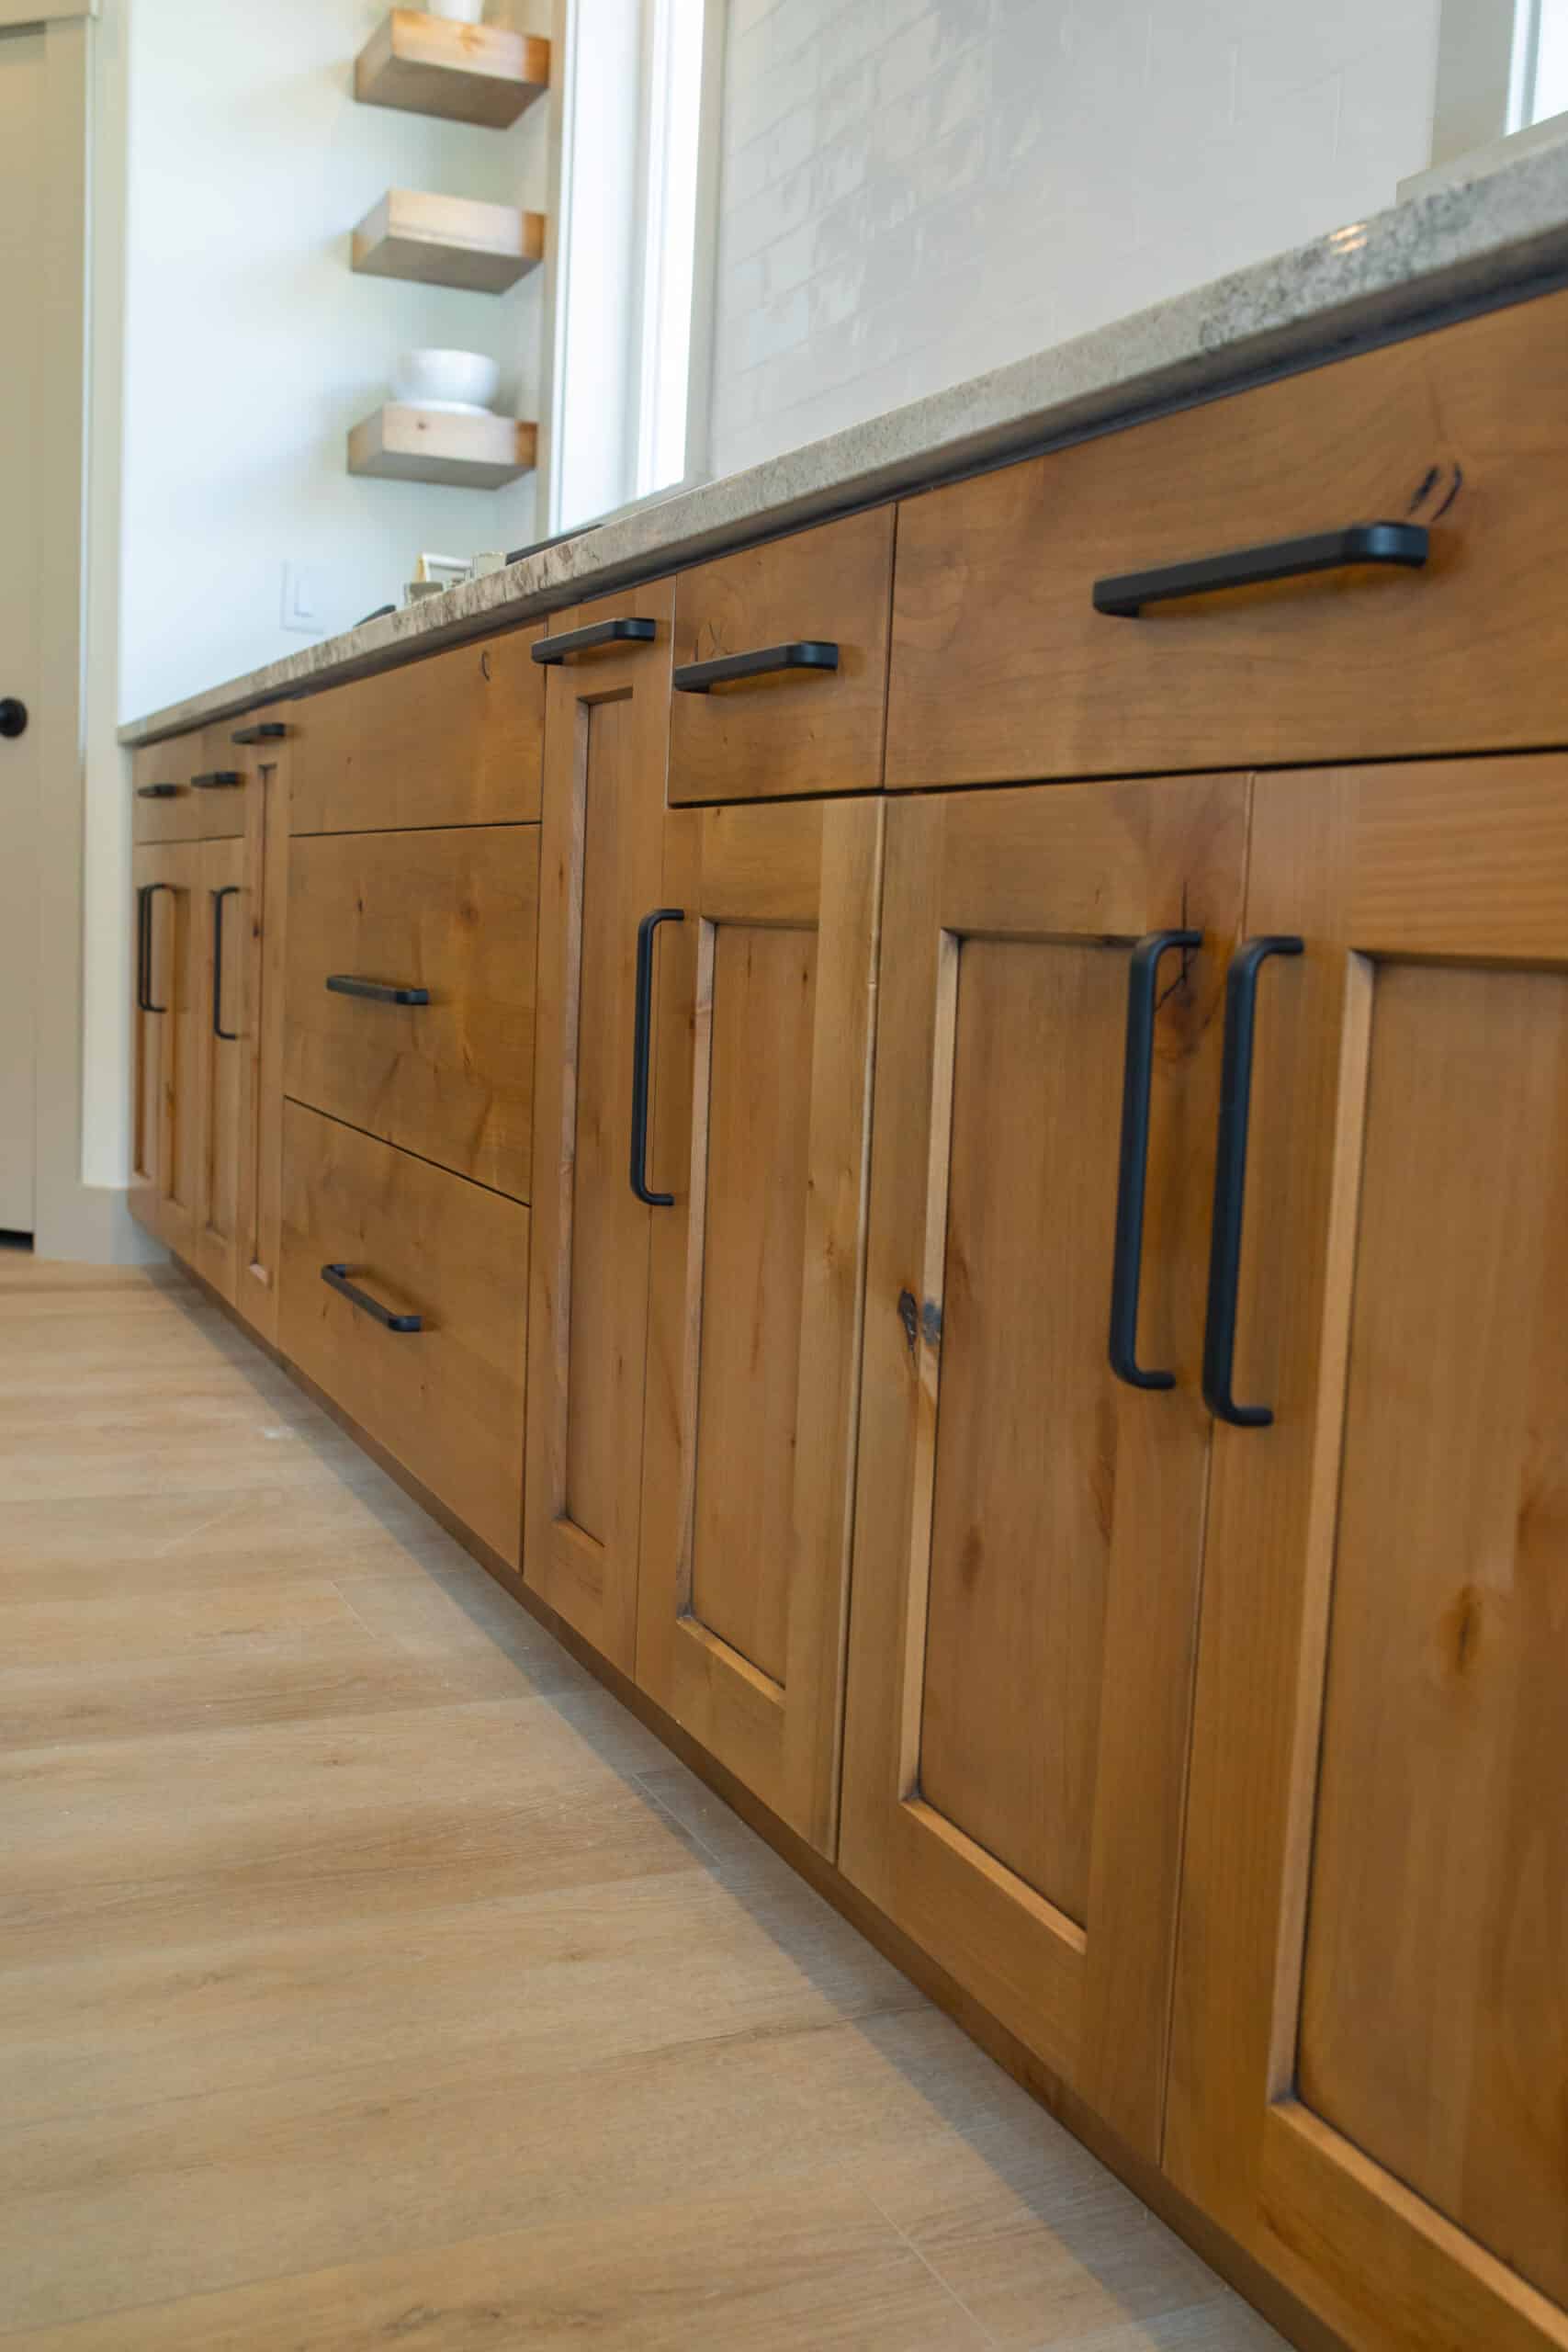 7 Ways To Determine If Your Cabinets Are High Quality Kitchen cabinets Willard Utah